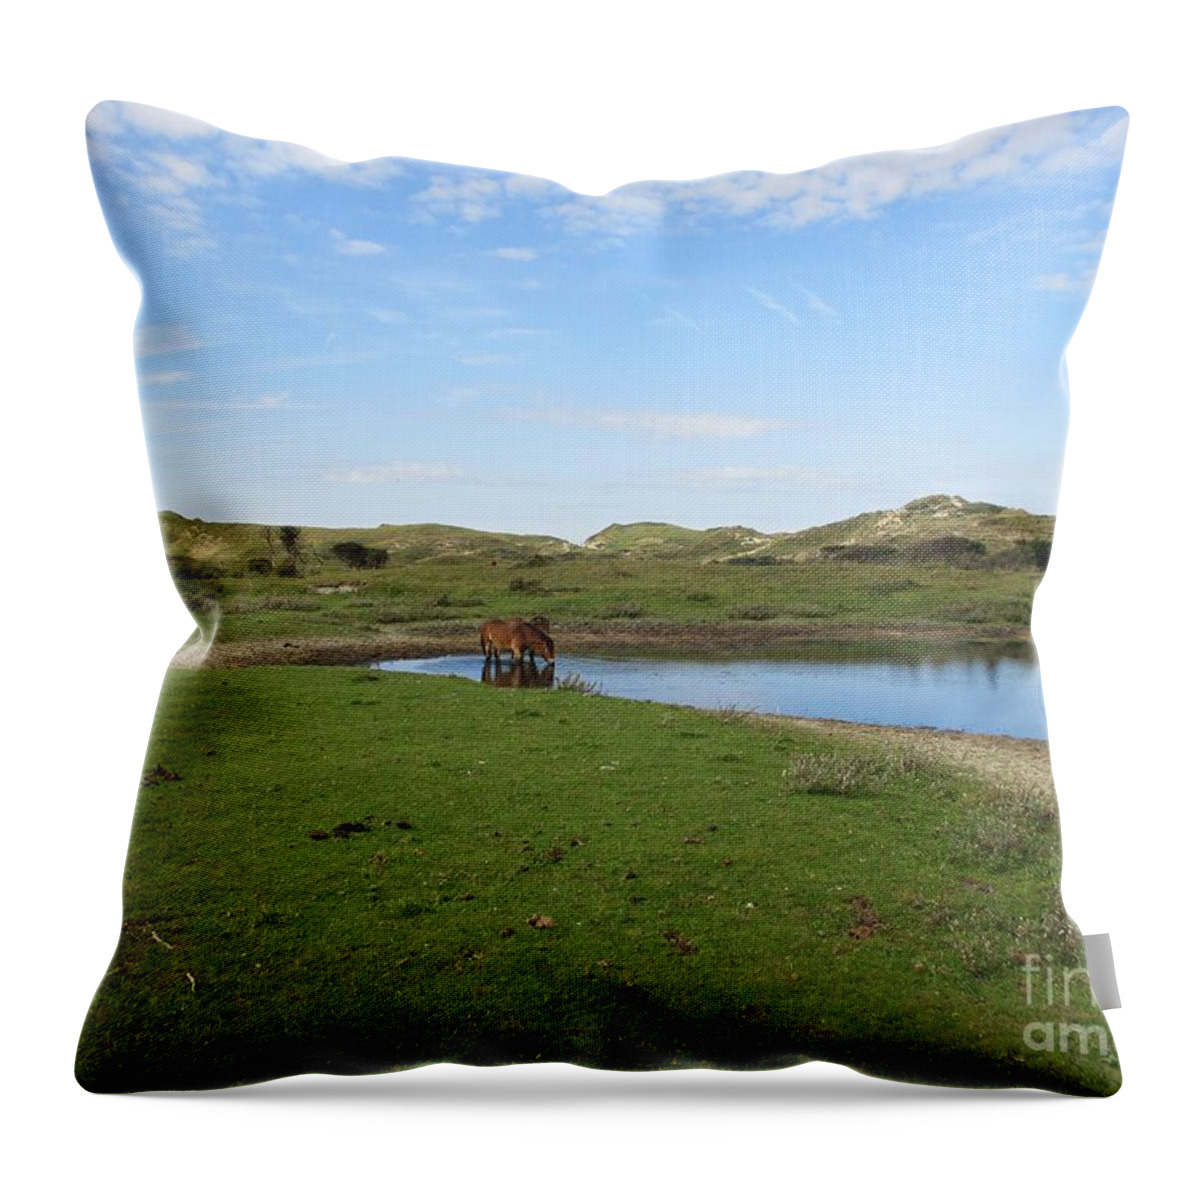 Noordhollandse Duinreservaat Throw Pillow featuring the photograph Small lake with wild horses by Chani Demuijlder